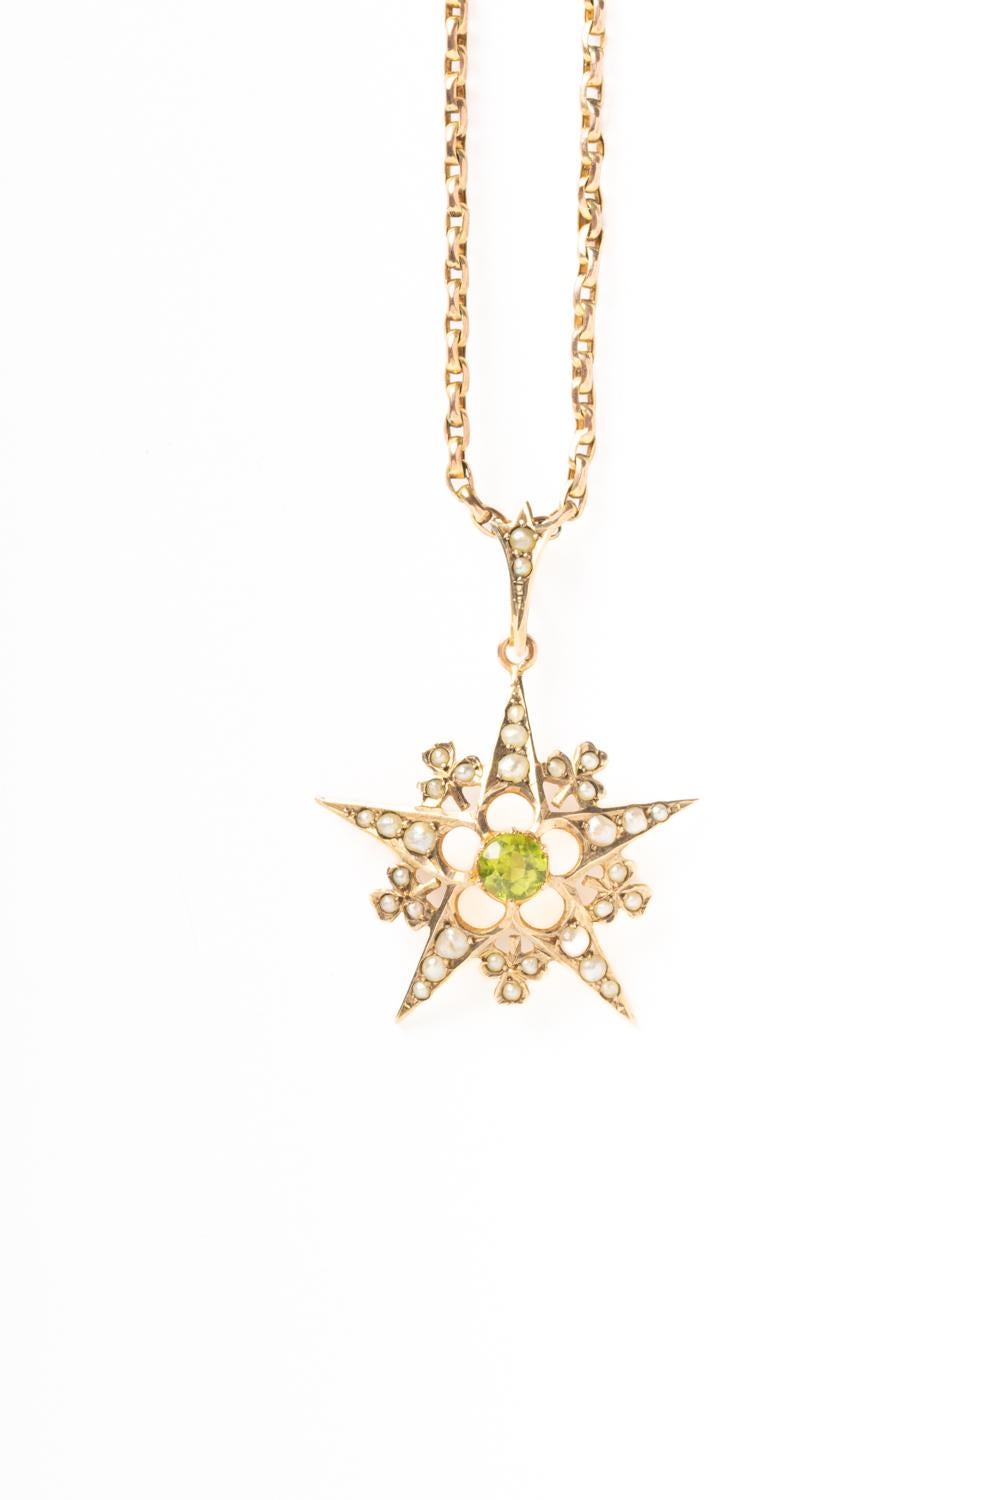 This beautiful antique Edwardian 9ct gold starburst pendant with peridot and seed pearls is more than 100 years old! This stunning Edwardian star design is set with a vibrant green peridot and 32 seed pearls including small loop. Peridot, known for